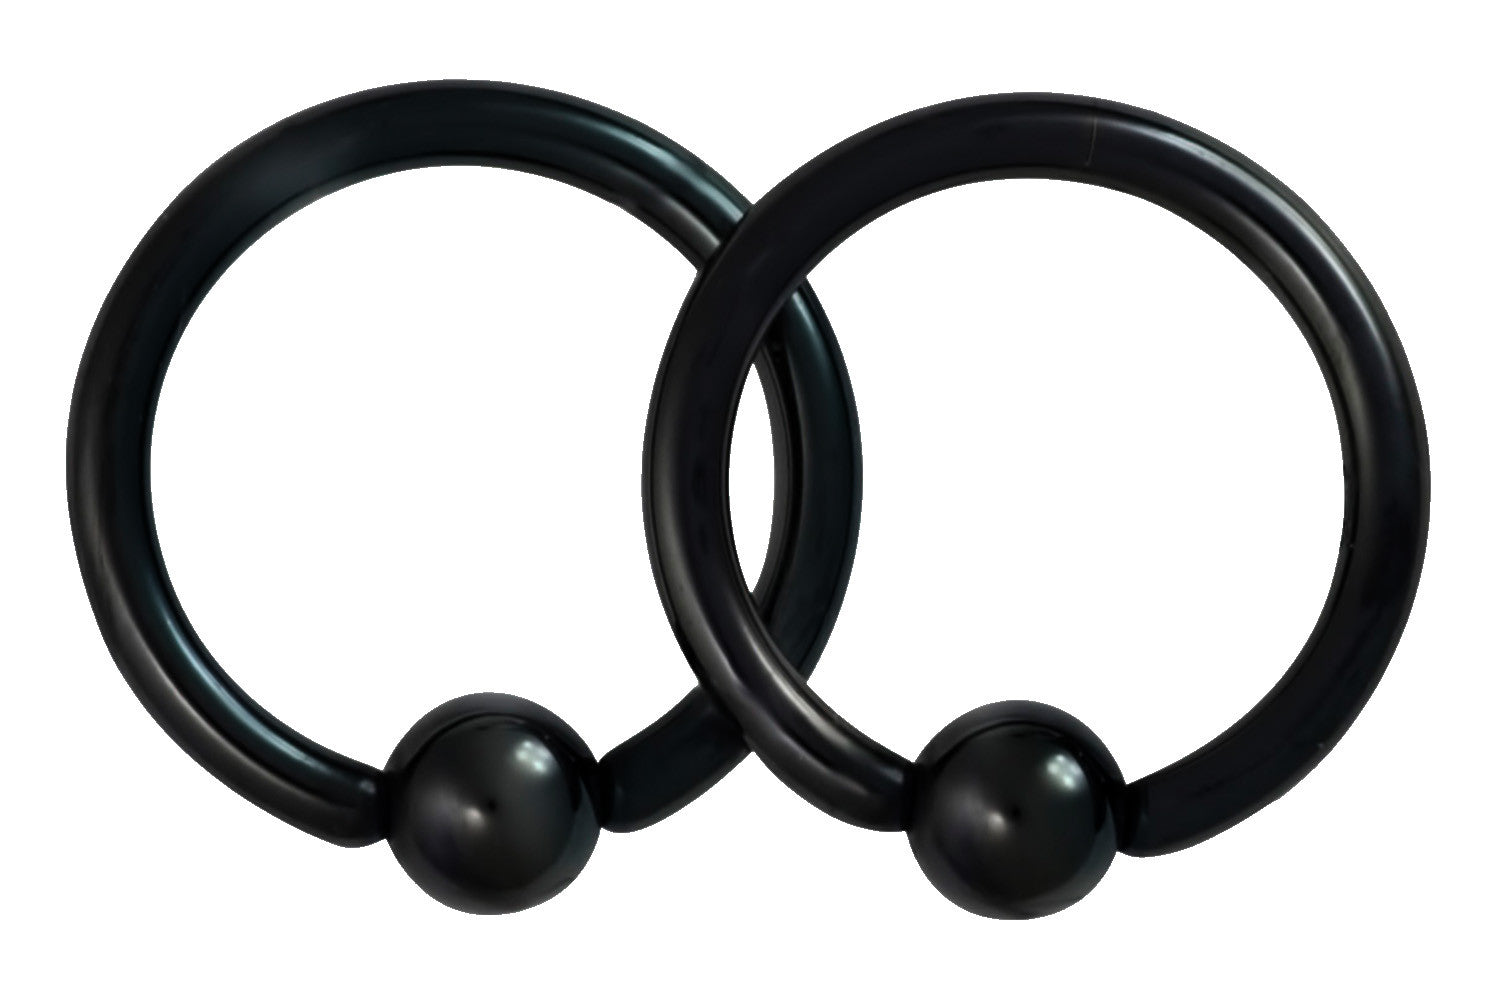 This pair of 14 gauge CBR ring is made with surgical grade 316L Stainless Steel and black Titanium IP plating. The rings are 7/16" (11 mm) in diameter with 4 mm balls.